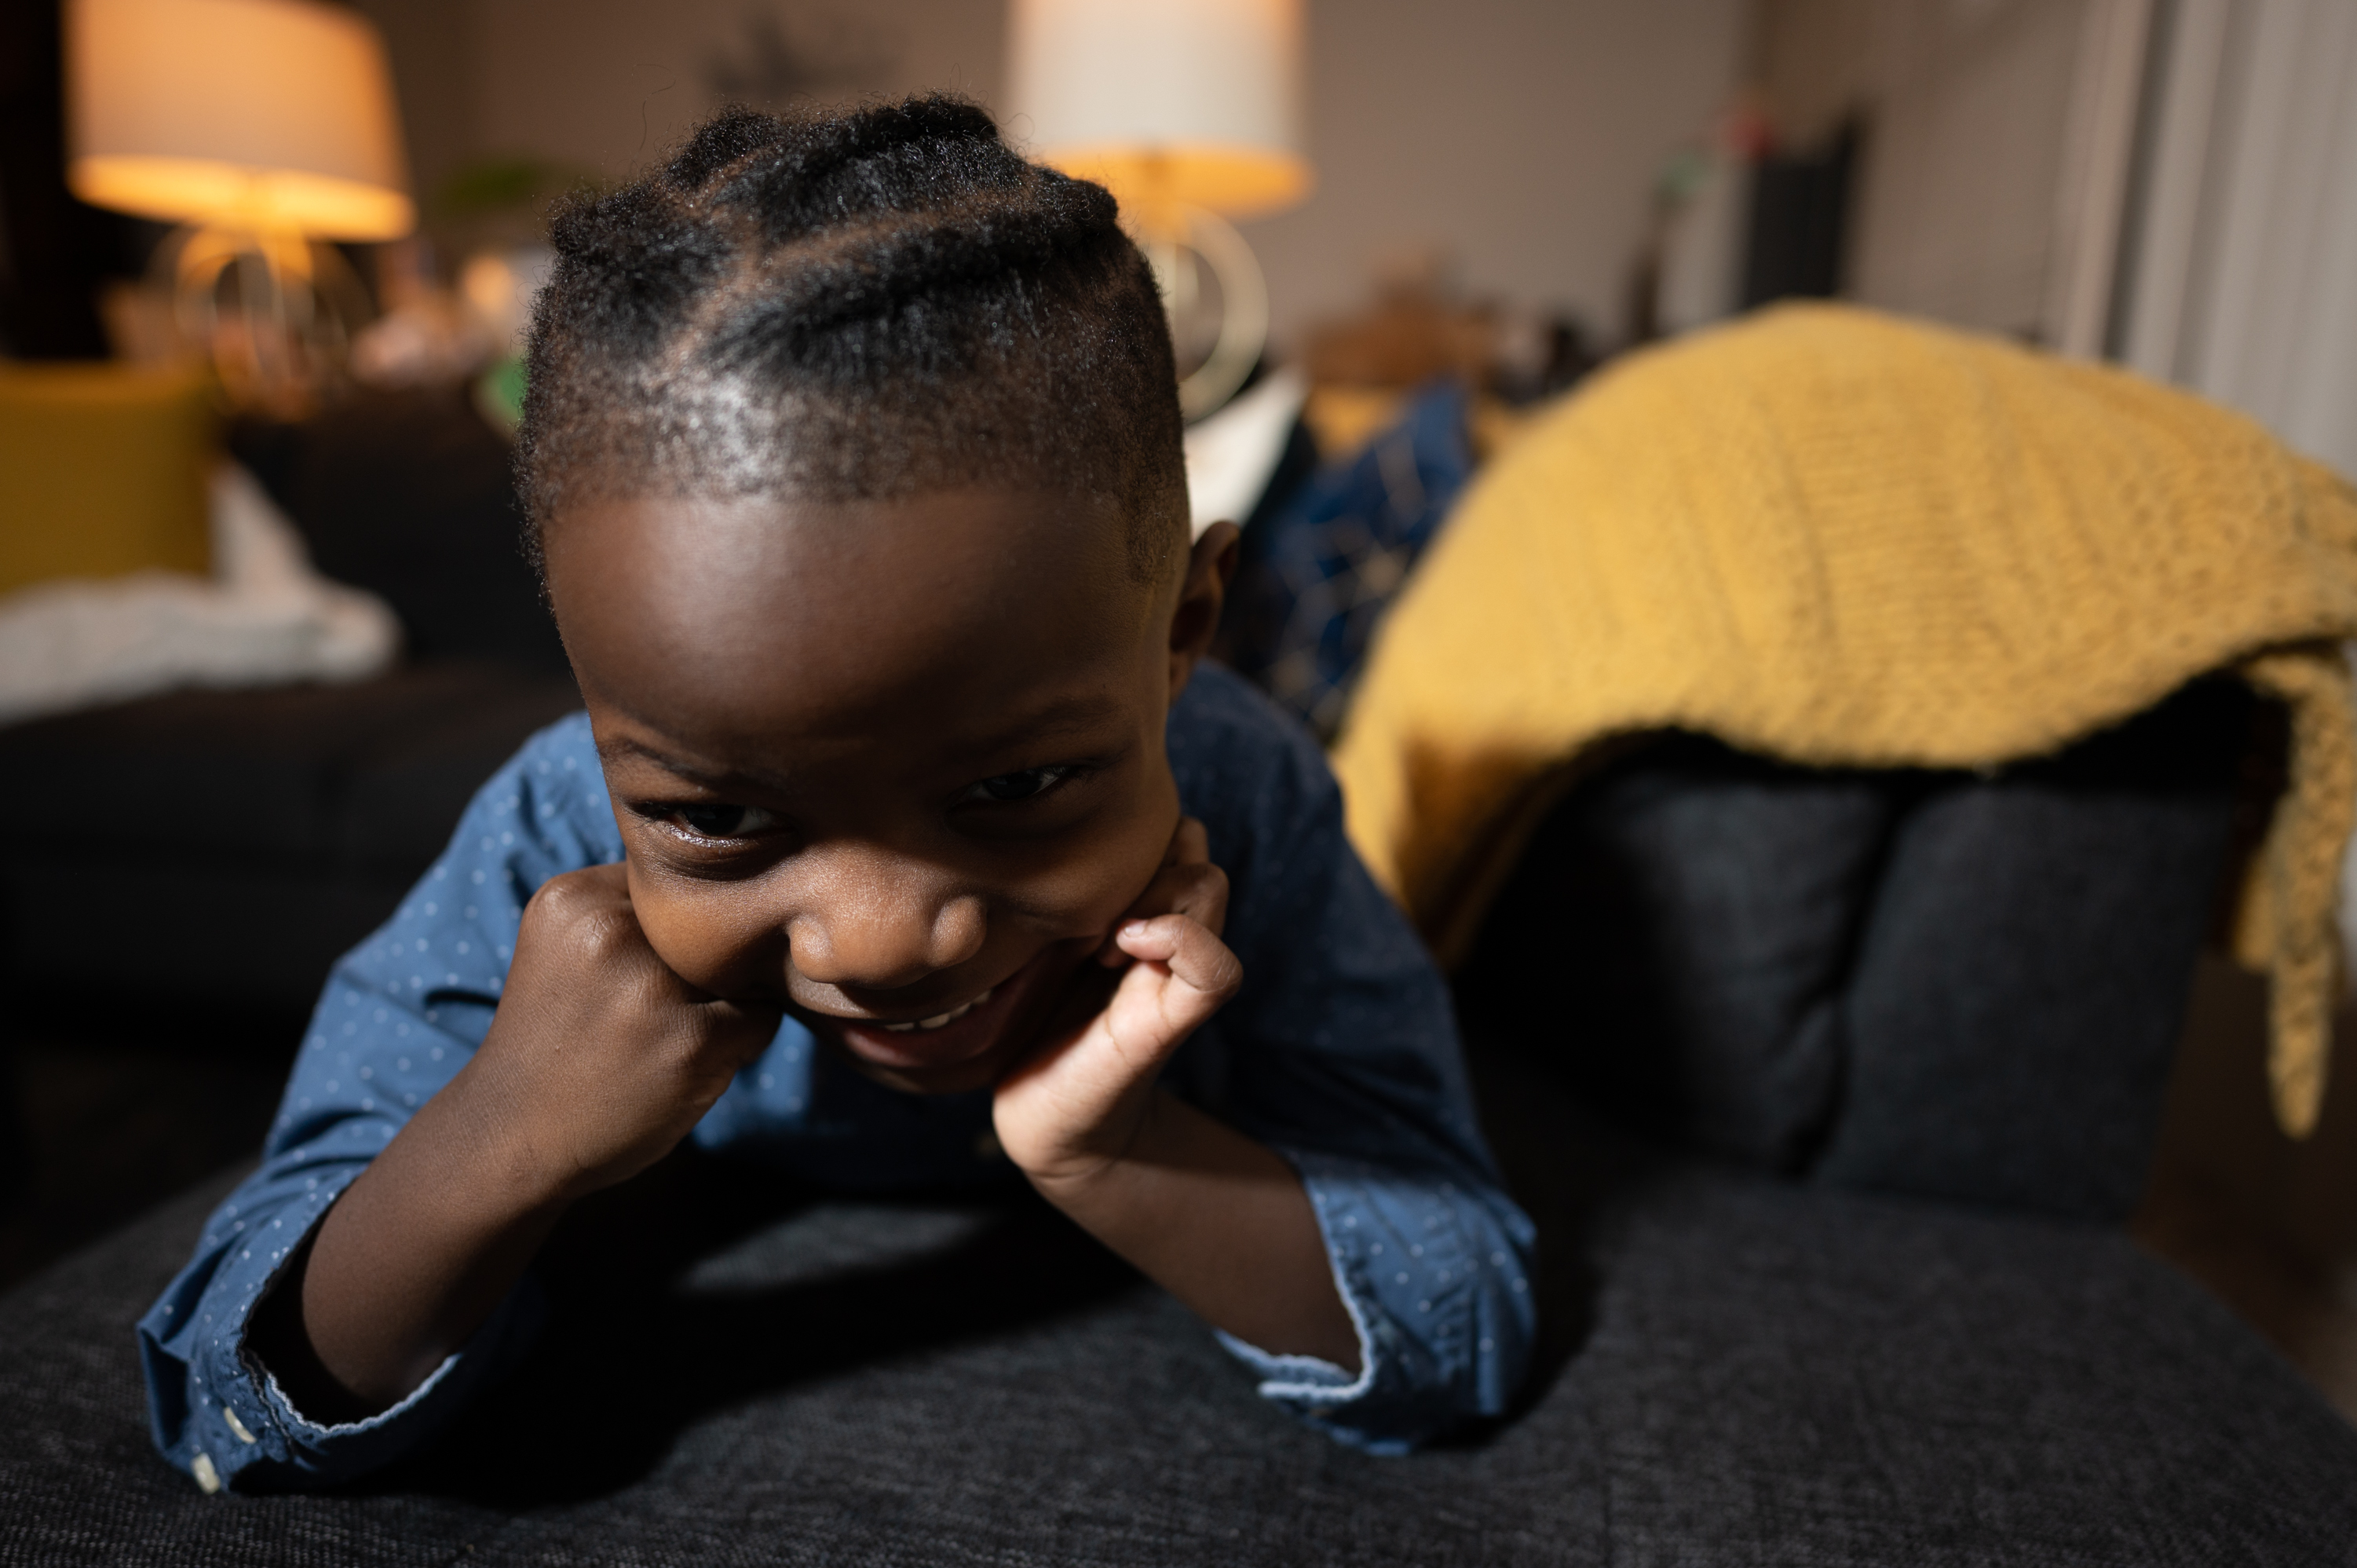 After West Side School Forces 4-Year-Old To Remove His Braids, Parents Ask:  Why Are We Policing Black Children's Hair?